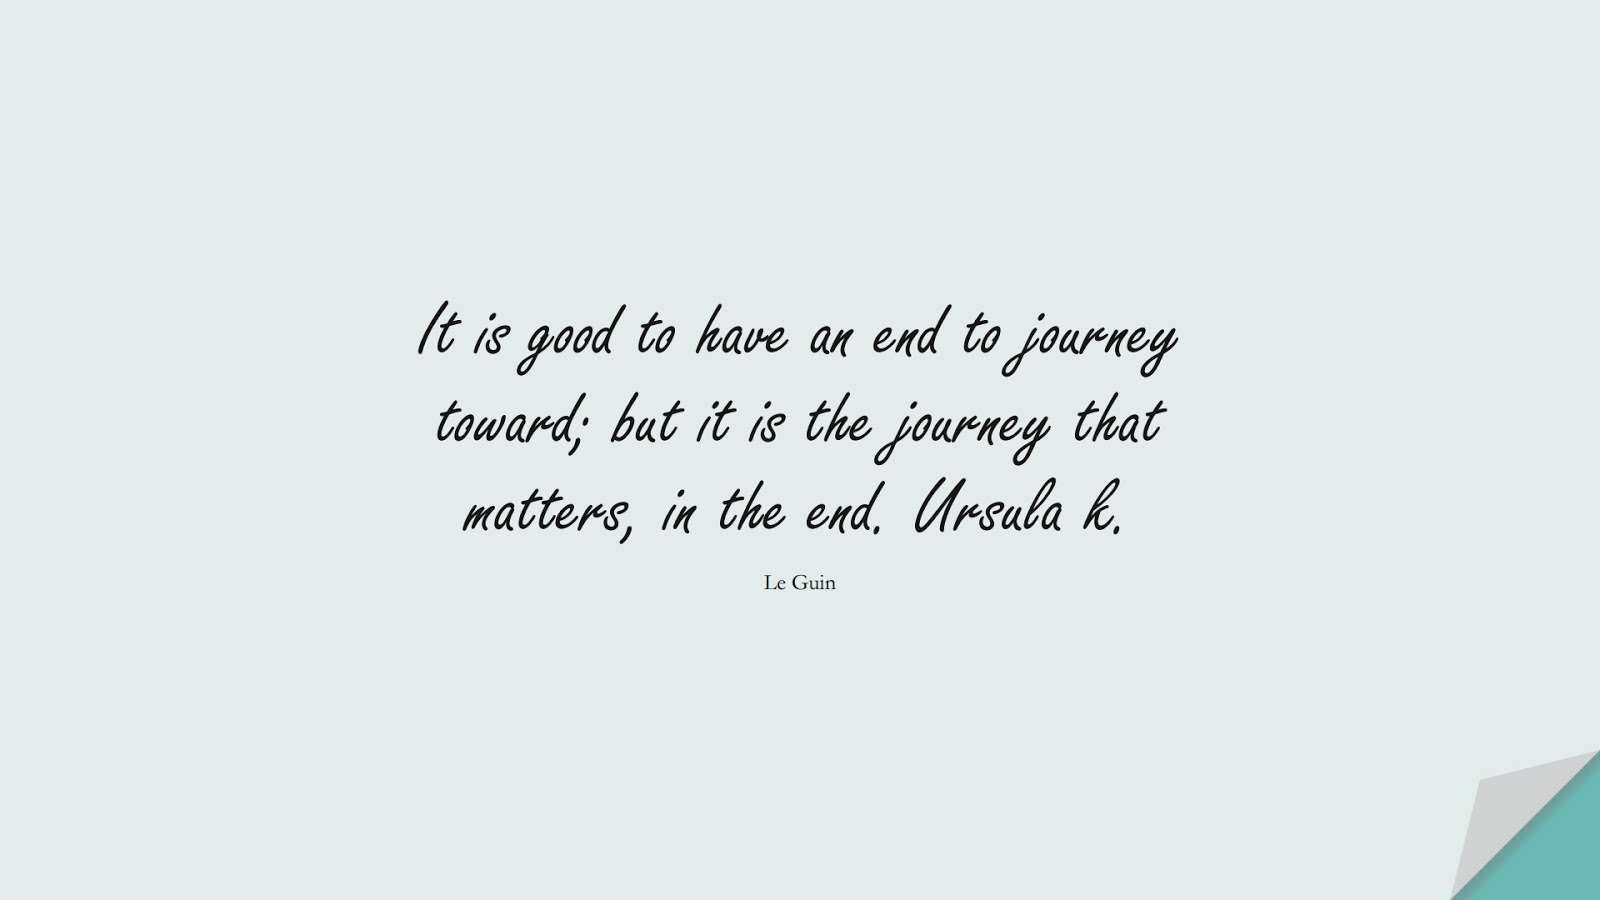 It is good to have an end to journey toward; but it is the journey that matters, in the end. Ursula k. (Le Guin);  #HardWorkQuotes